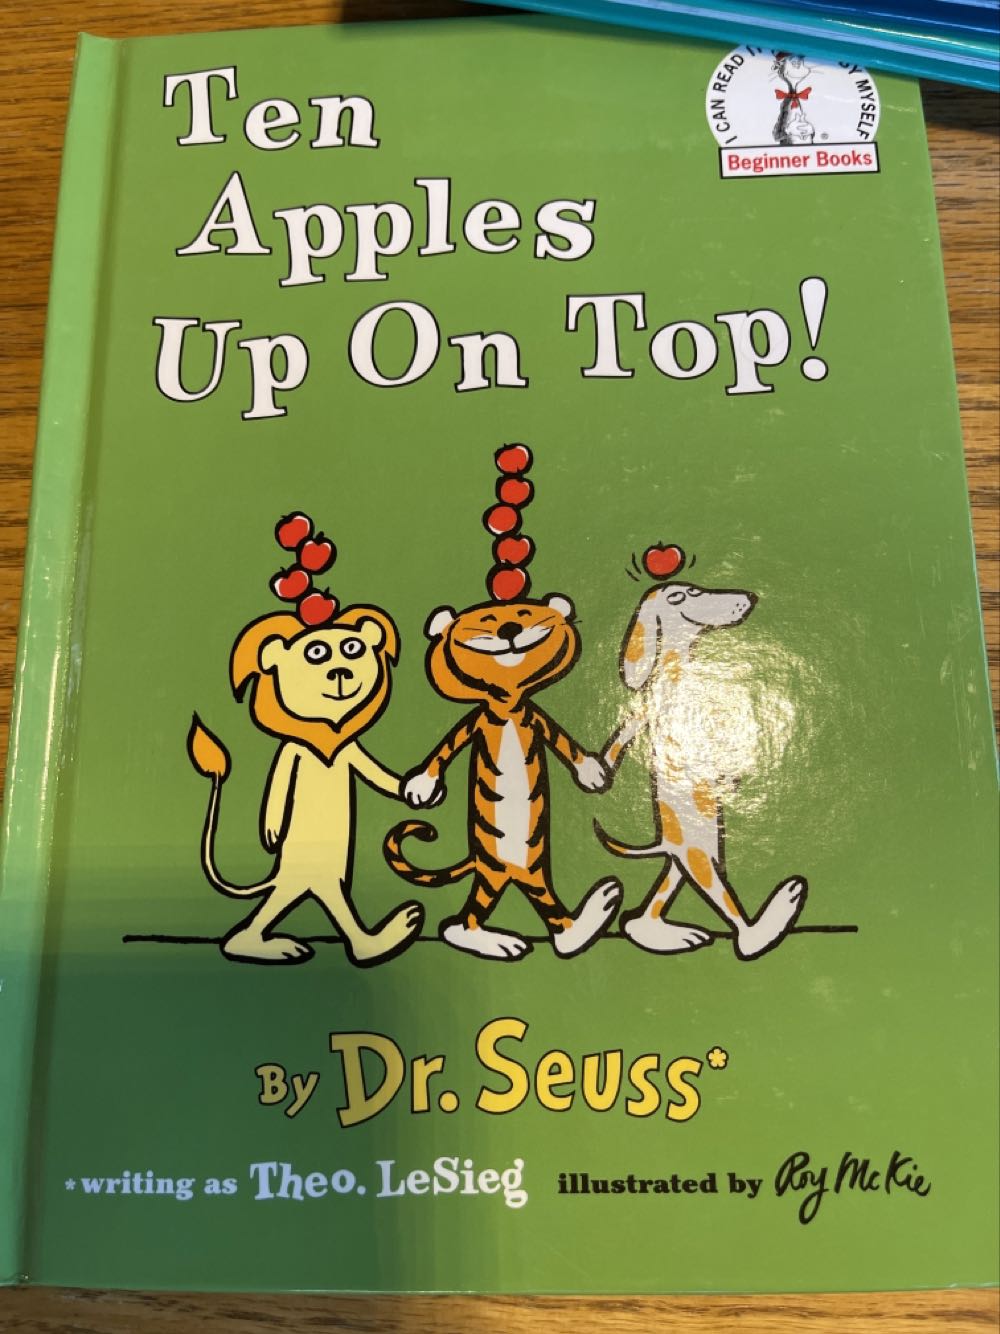 Ten Apples Up on Top - Theo LeSieg (Random House - Hardcover) book collectible [Barcode 9780394800196] - Main Image 3